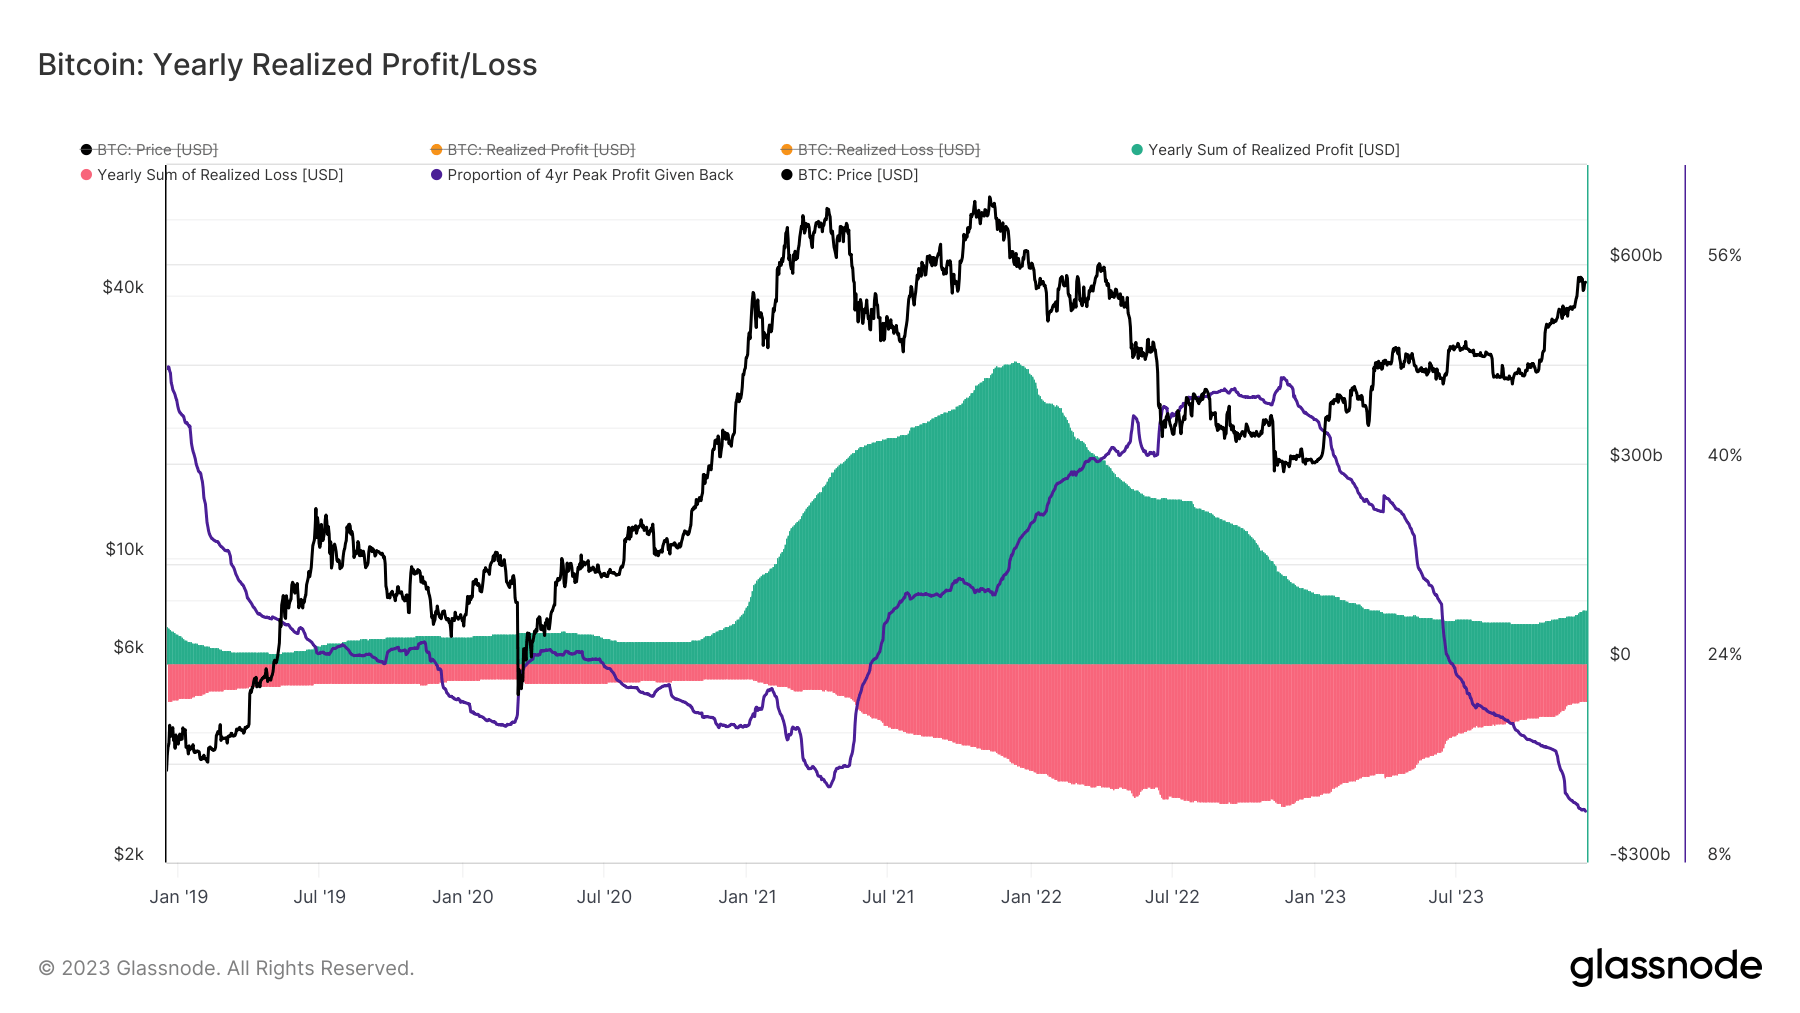 Realized gains and losses reflect a volatile year for Bitcoin